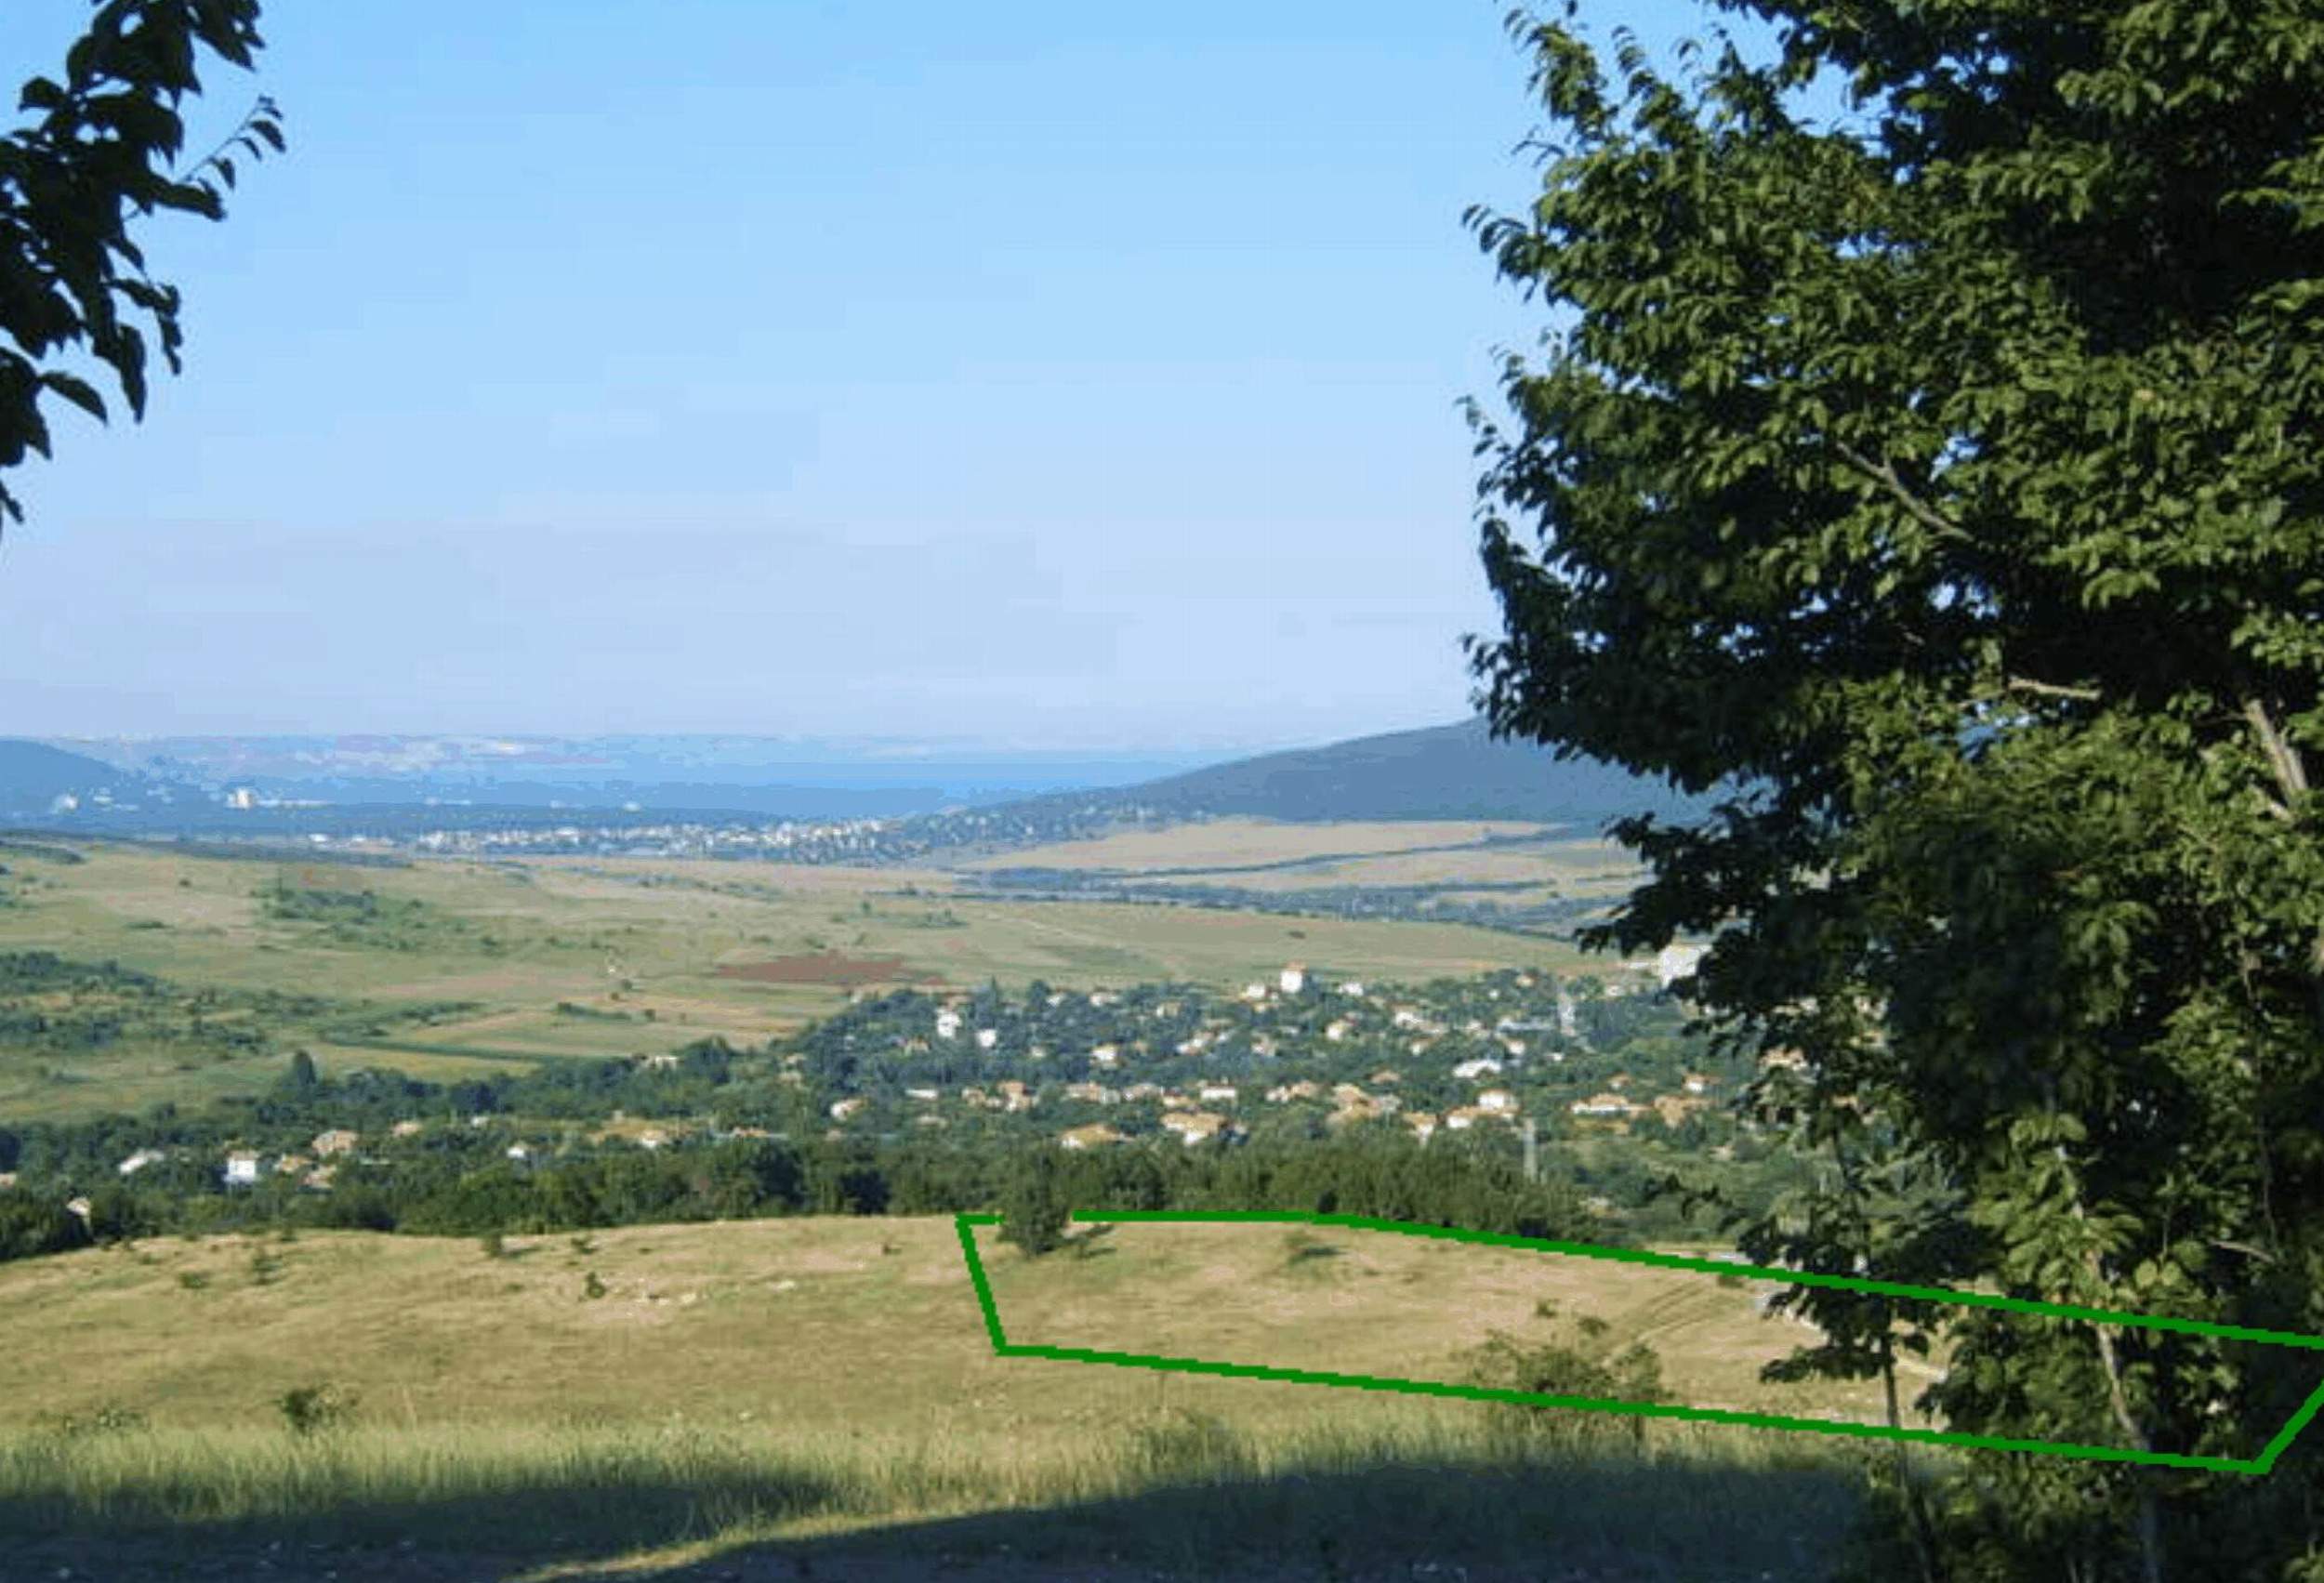 The view towards the Black Sea from the very top of the hill. The land plot is marked in green. 